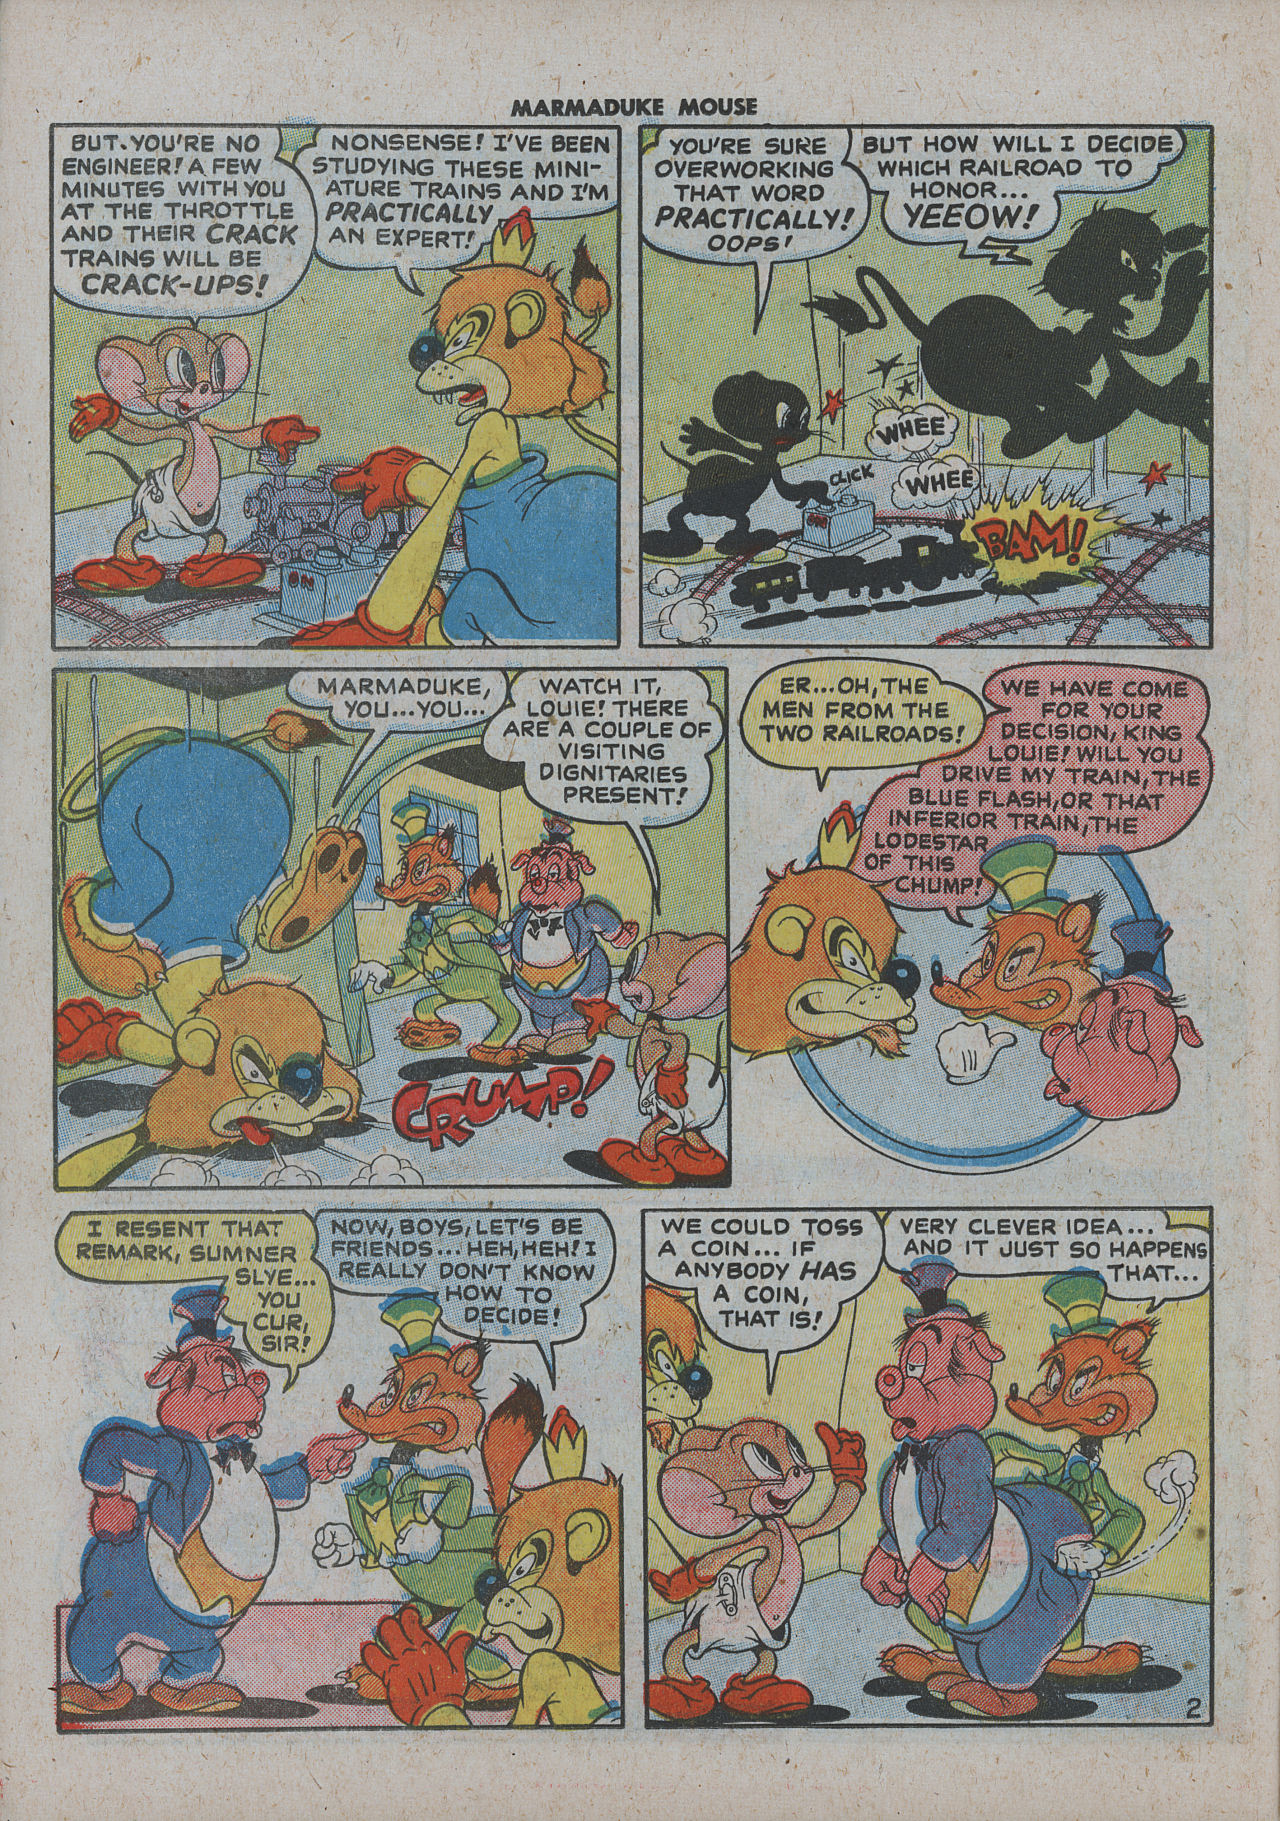 Read online Marmaduke Mouse comic -  Issue #14 - 16